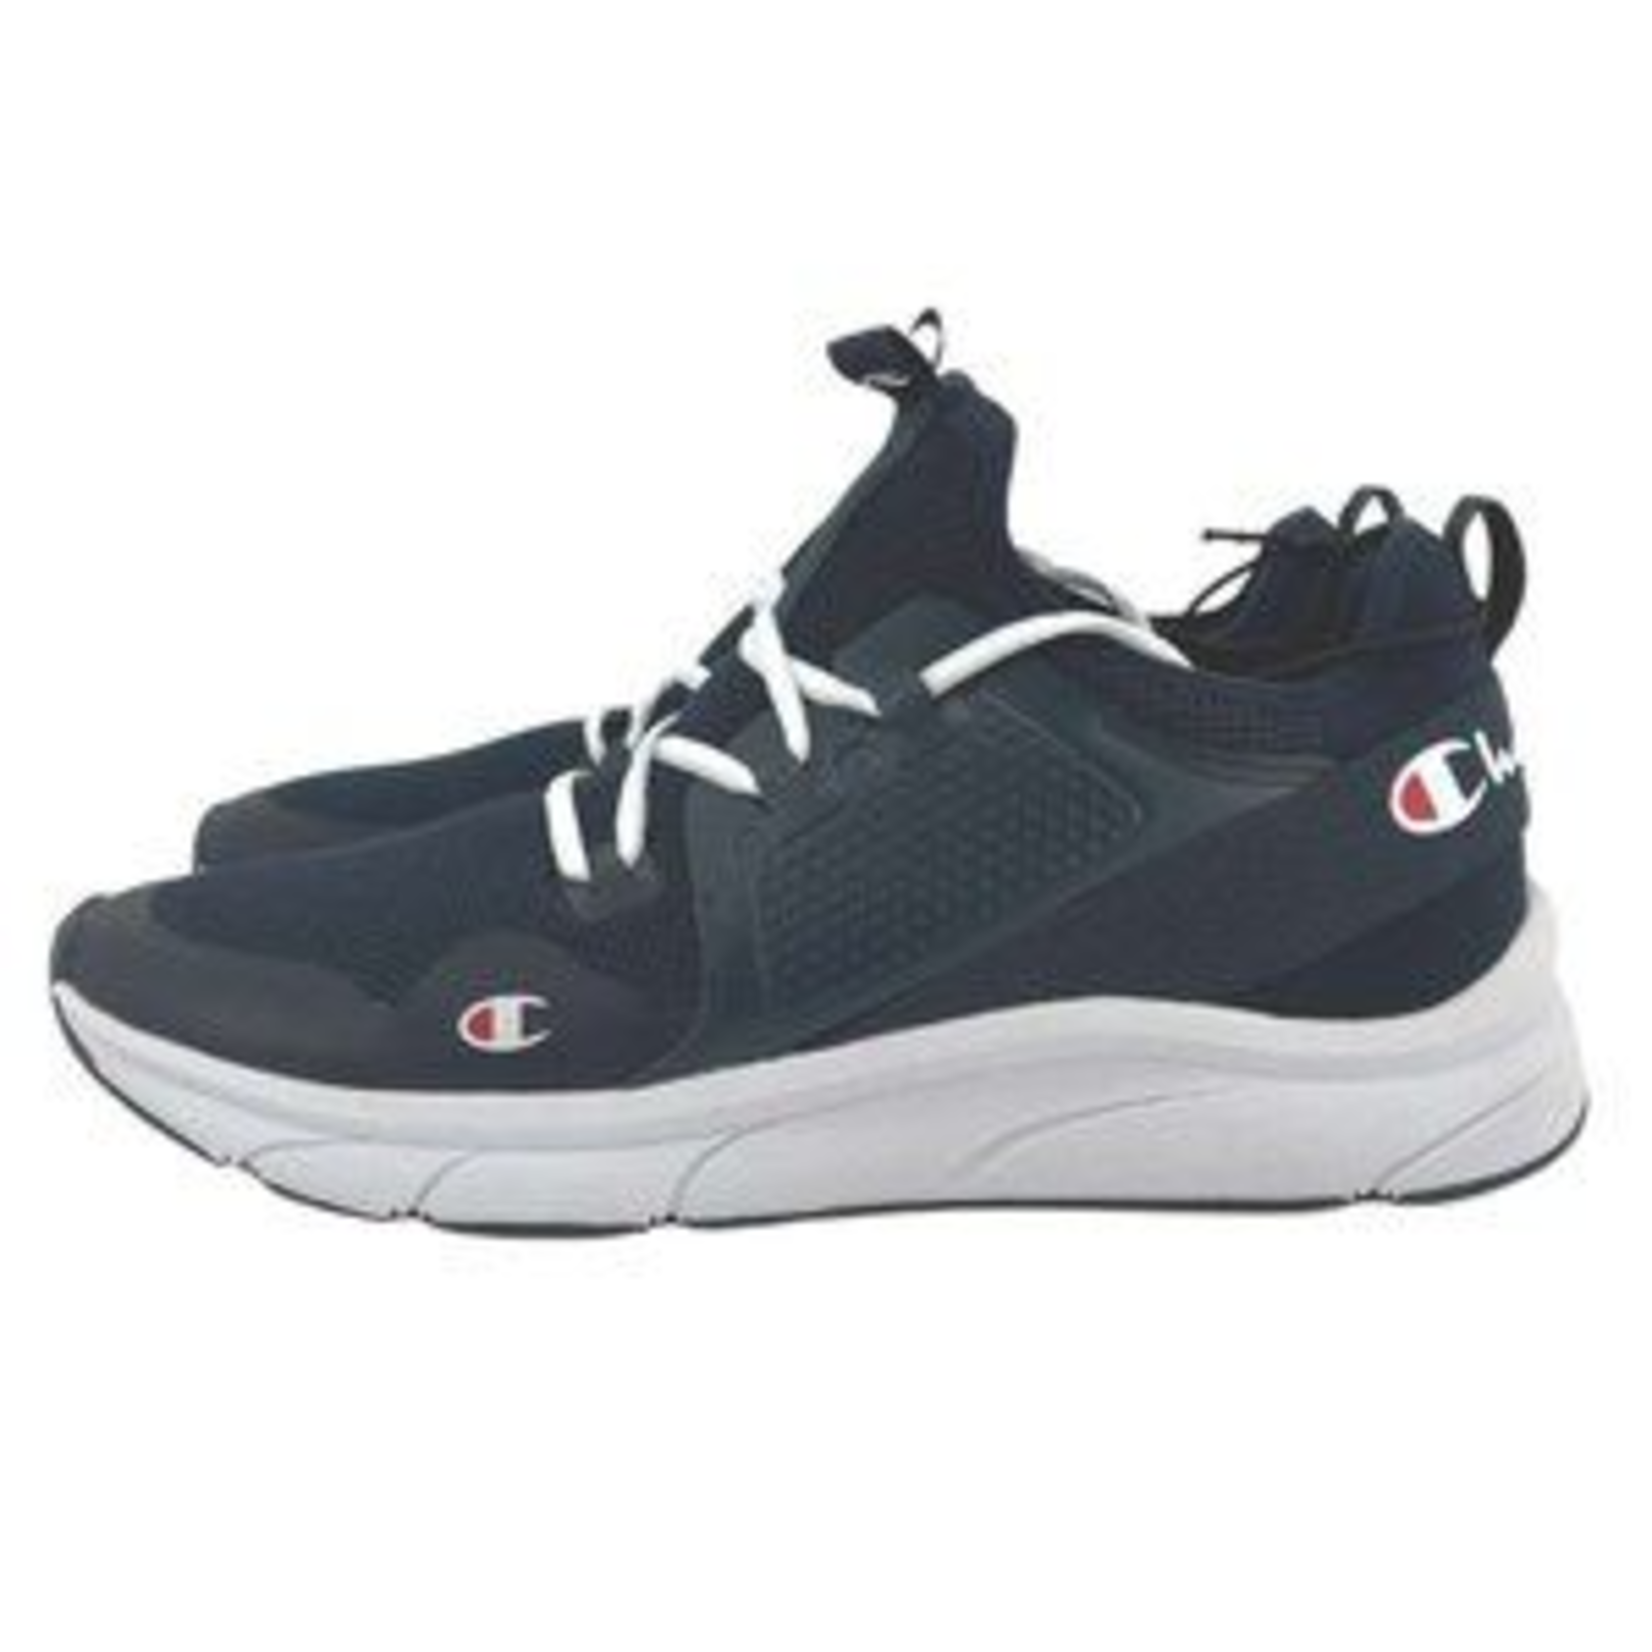 CHAMPION FLARE MEN'S RUNNERS -BLUE OR BLACK SIZE 10